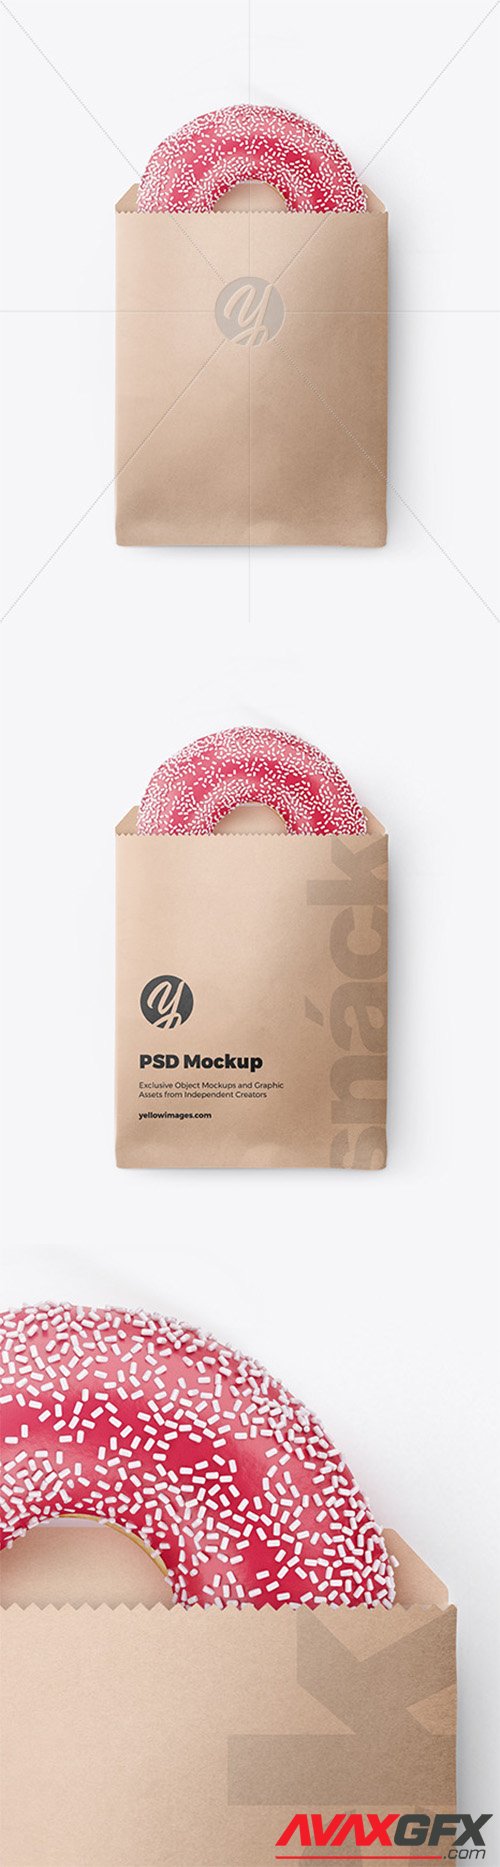 Download Yellowimages Mockups Toilet Paper Pack Mockup Branding Mockups Yellowimages Mockups